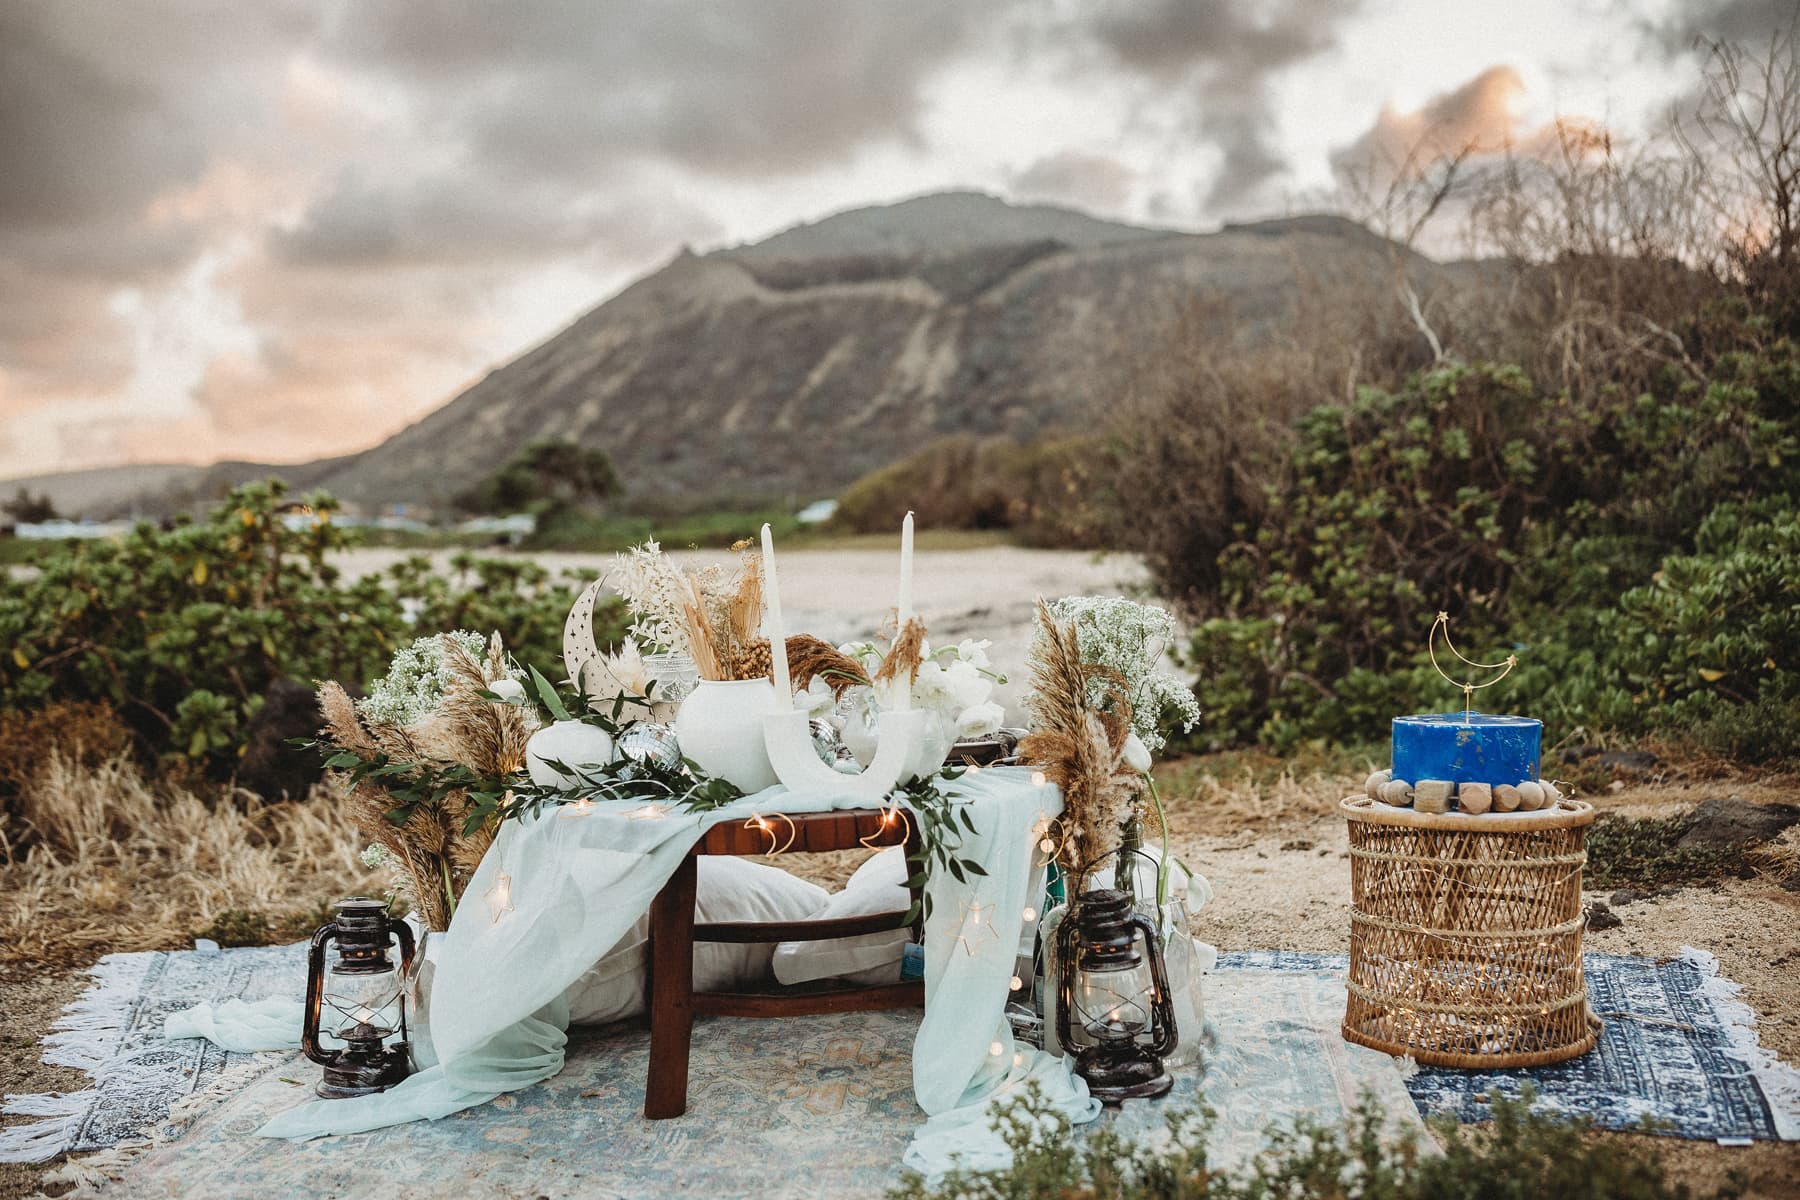 Wedding & Elopement Photographer, a festive table is displayed in the outdoors with floral arrangements